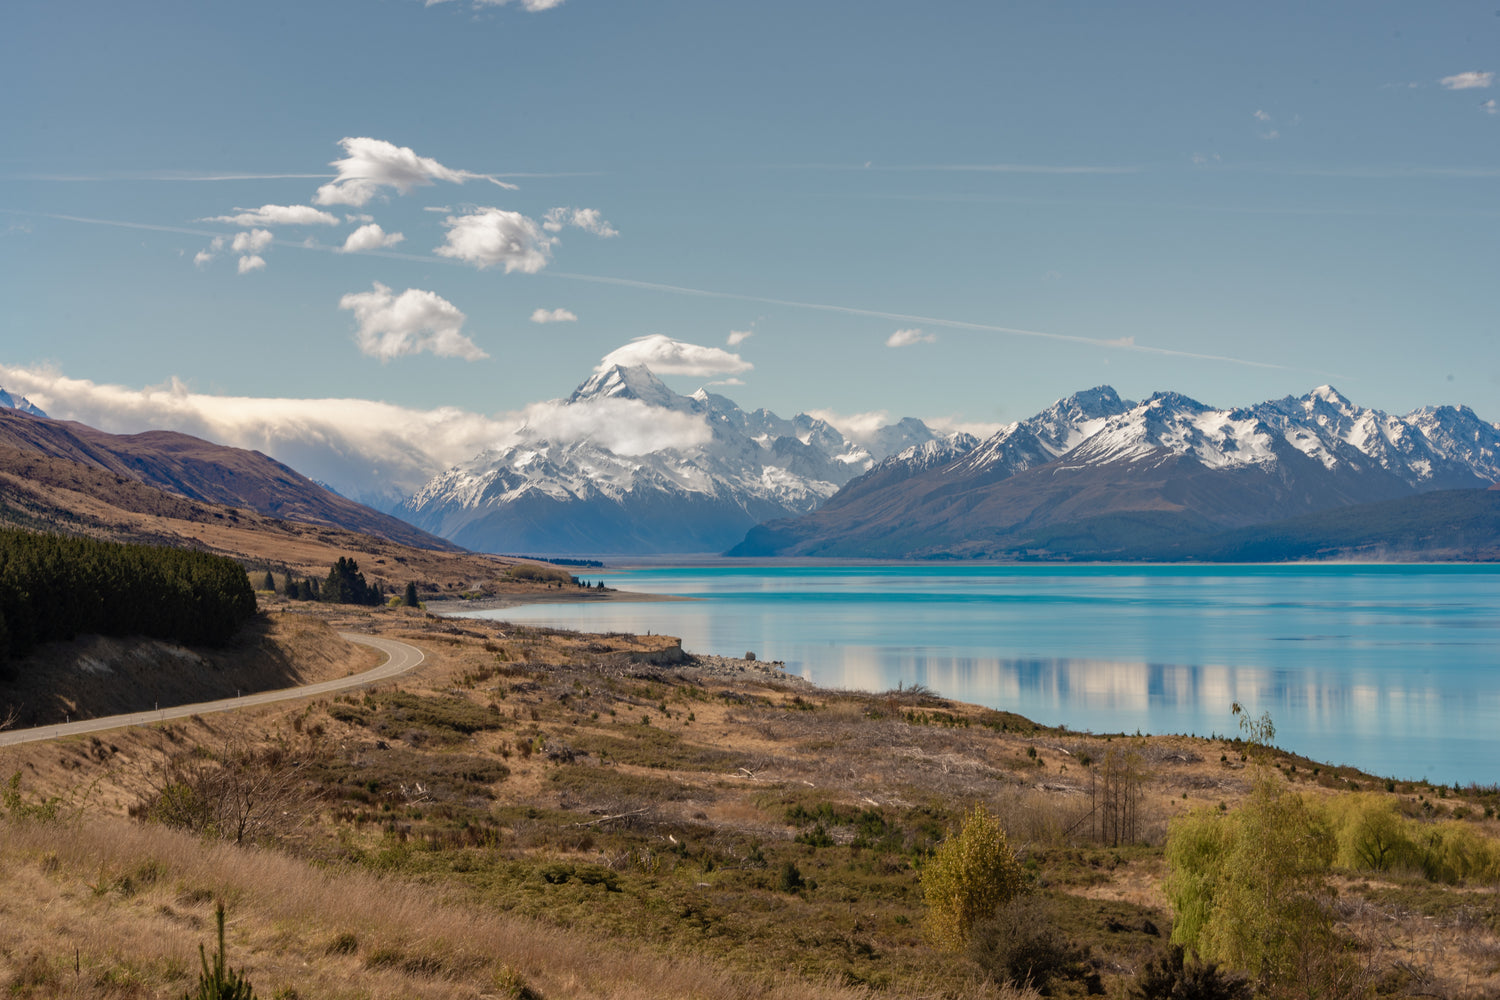 An alpine lake in New Zealand with mountains in the background